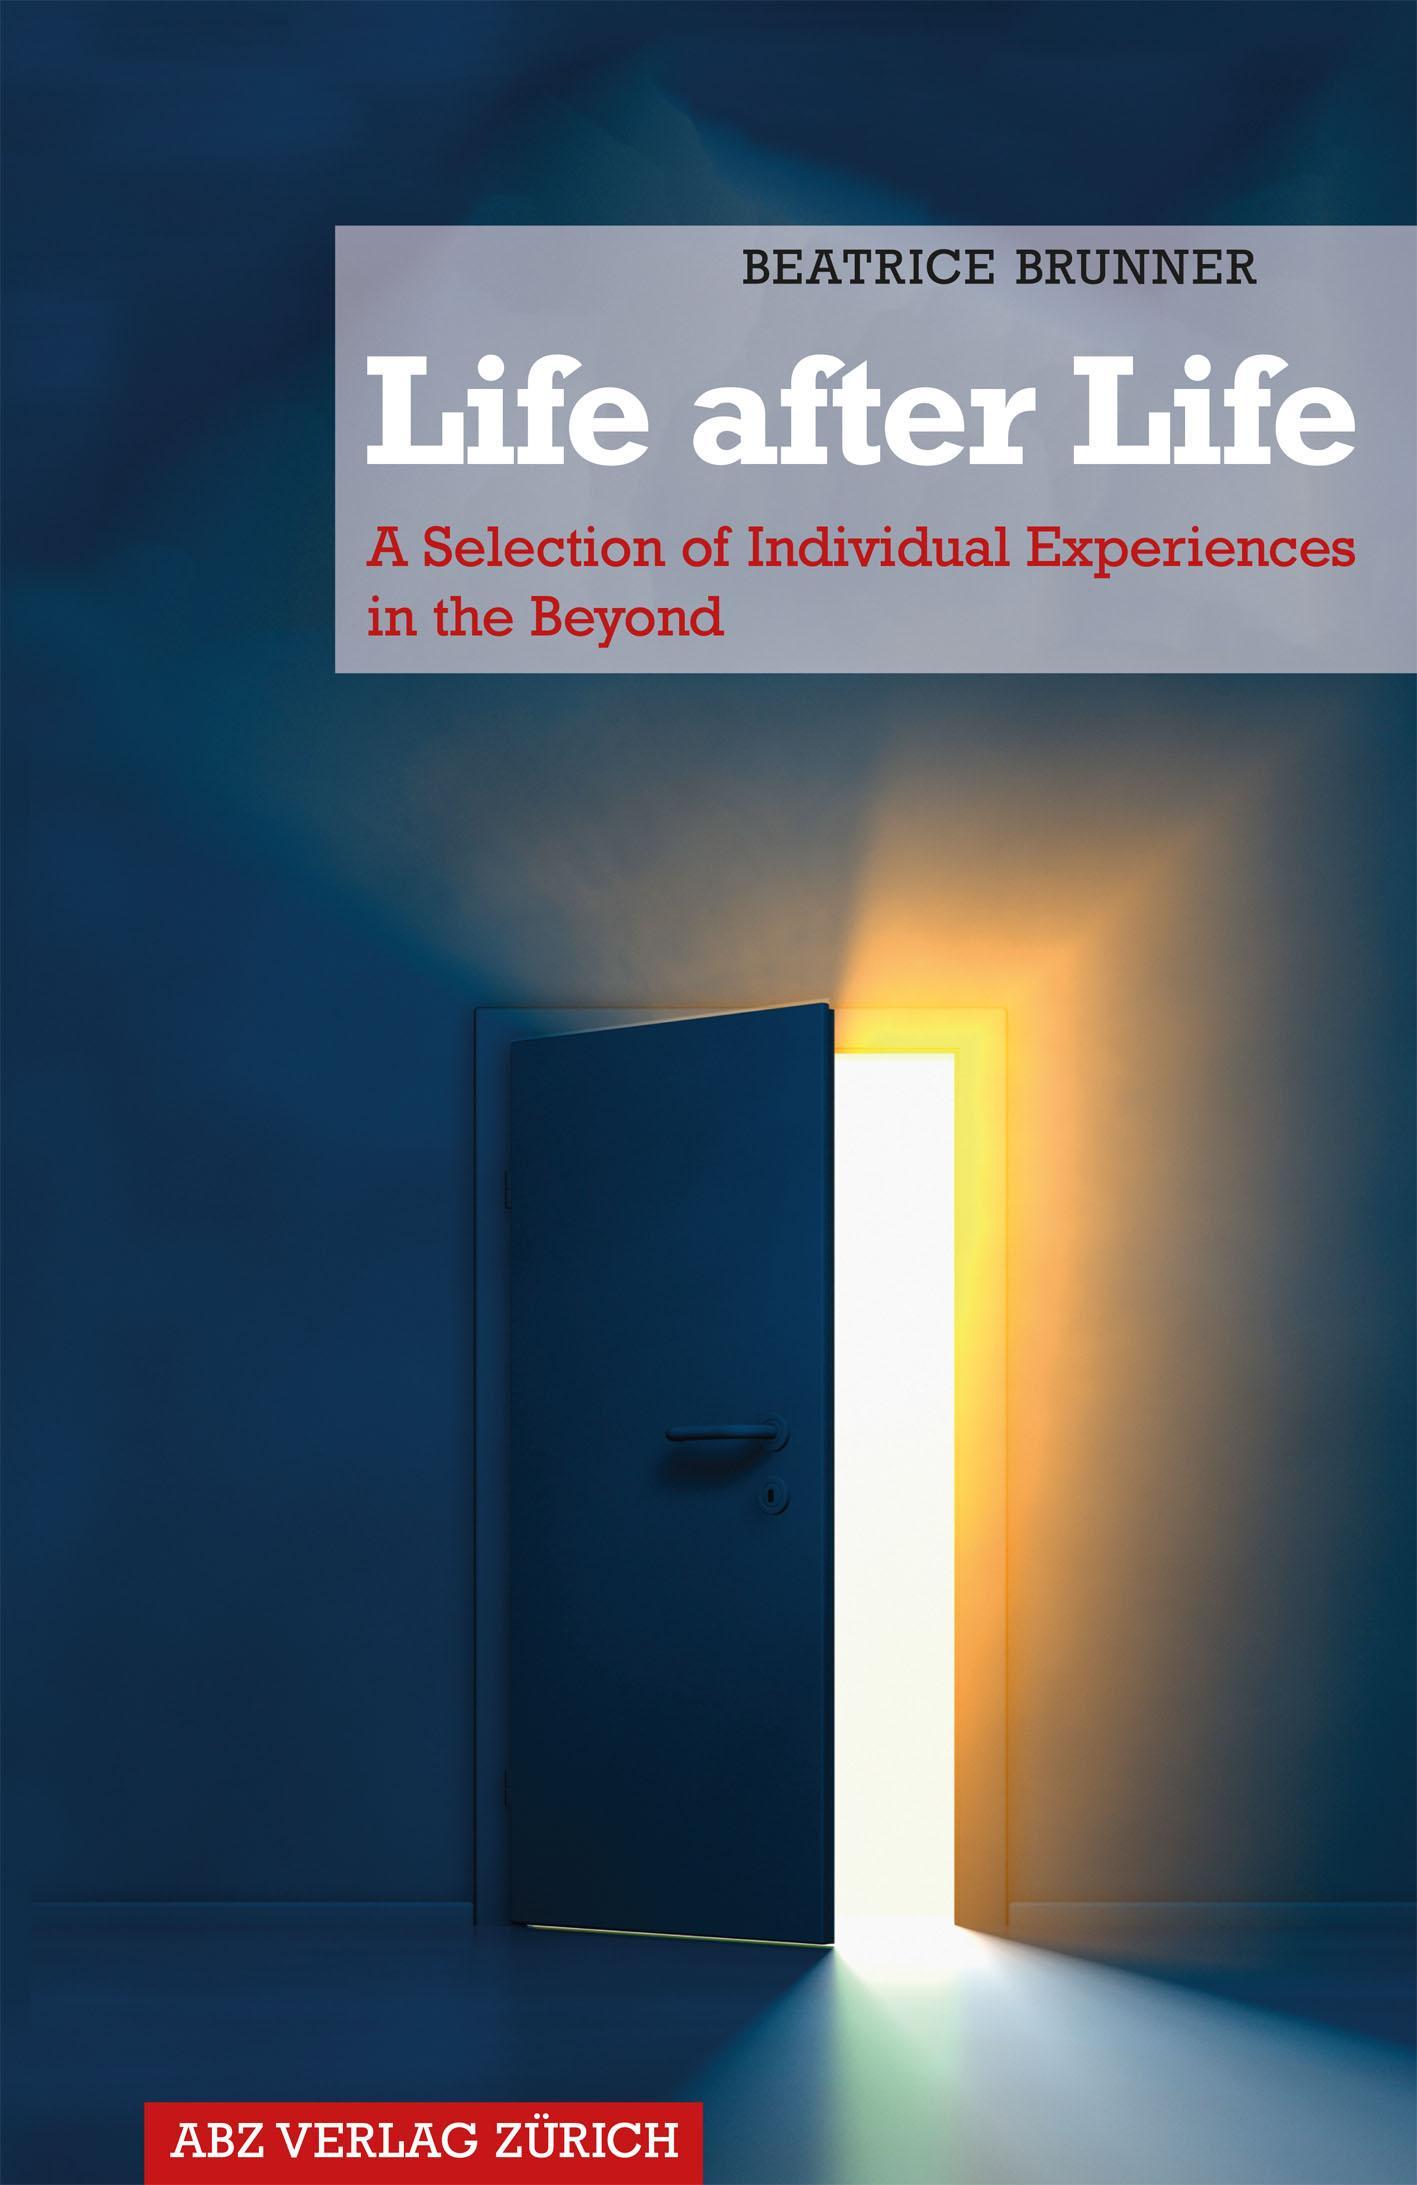 Cover of the Book Life after Life – A Selection of Individual Experiences in the Beyond by Medium Beatrice Brunner